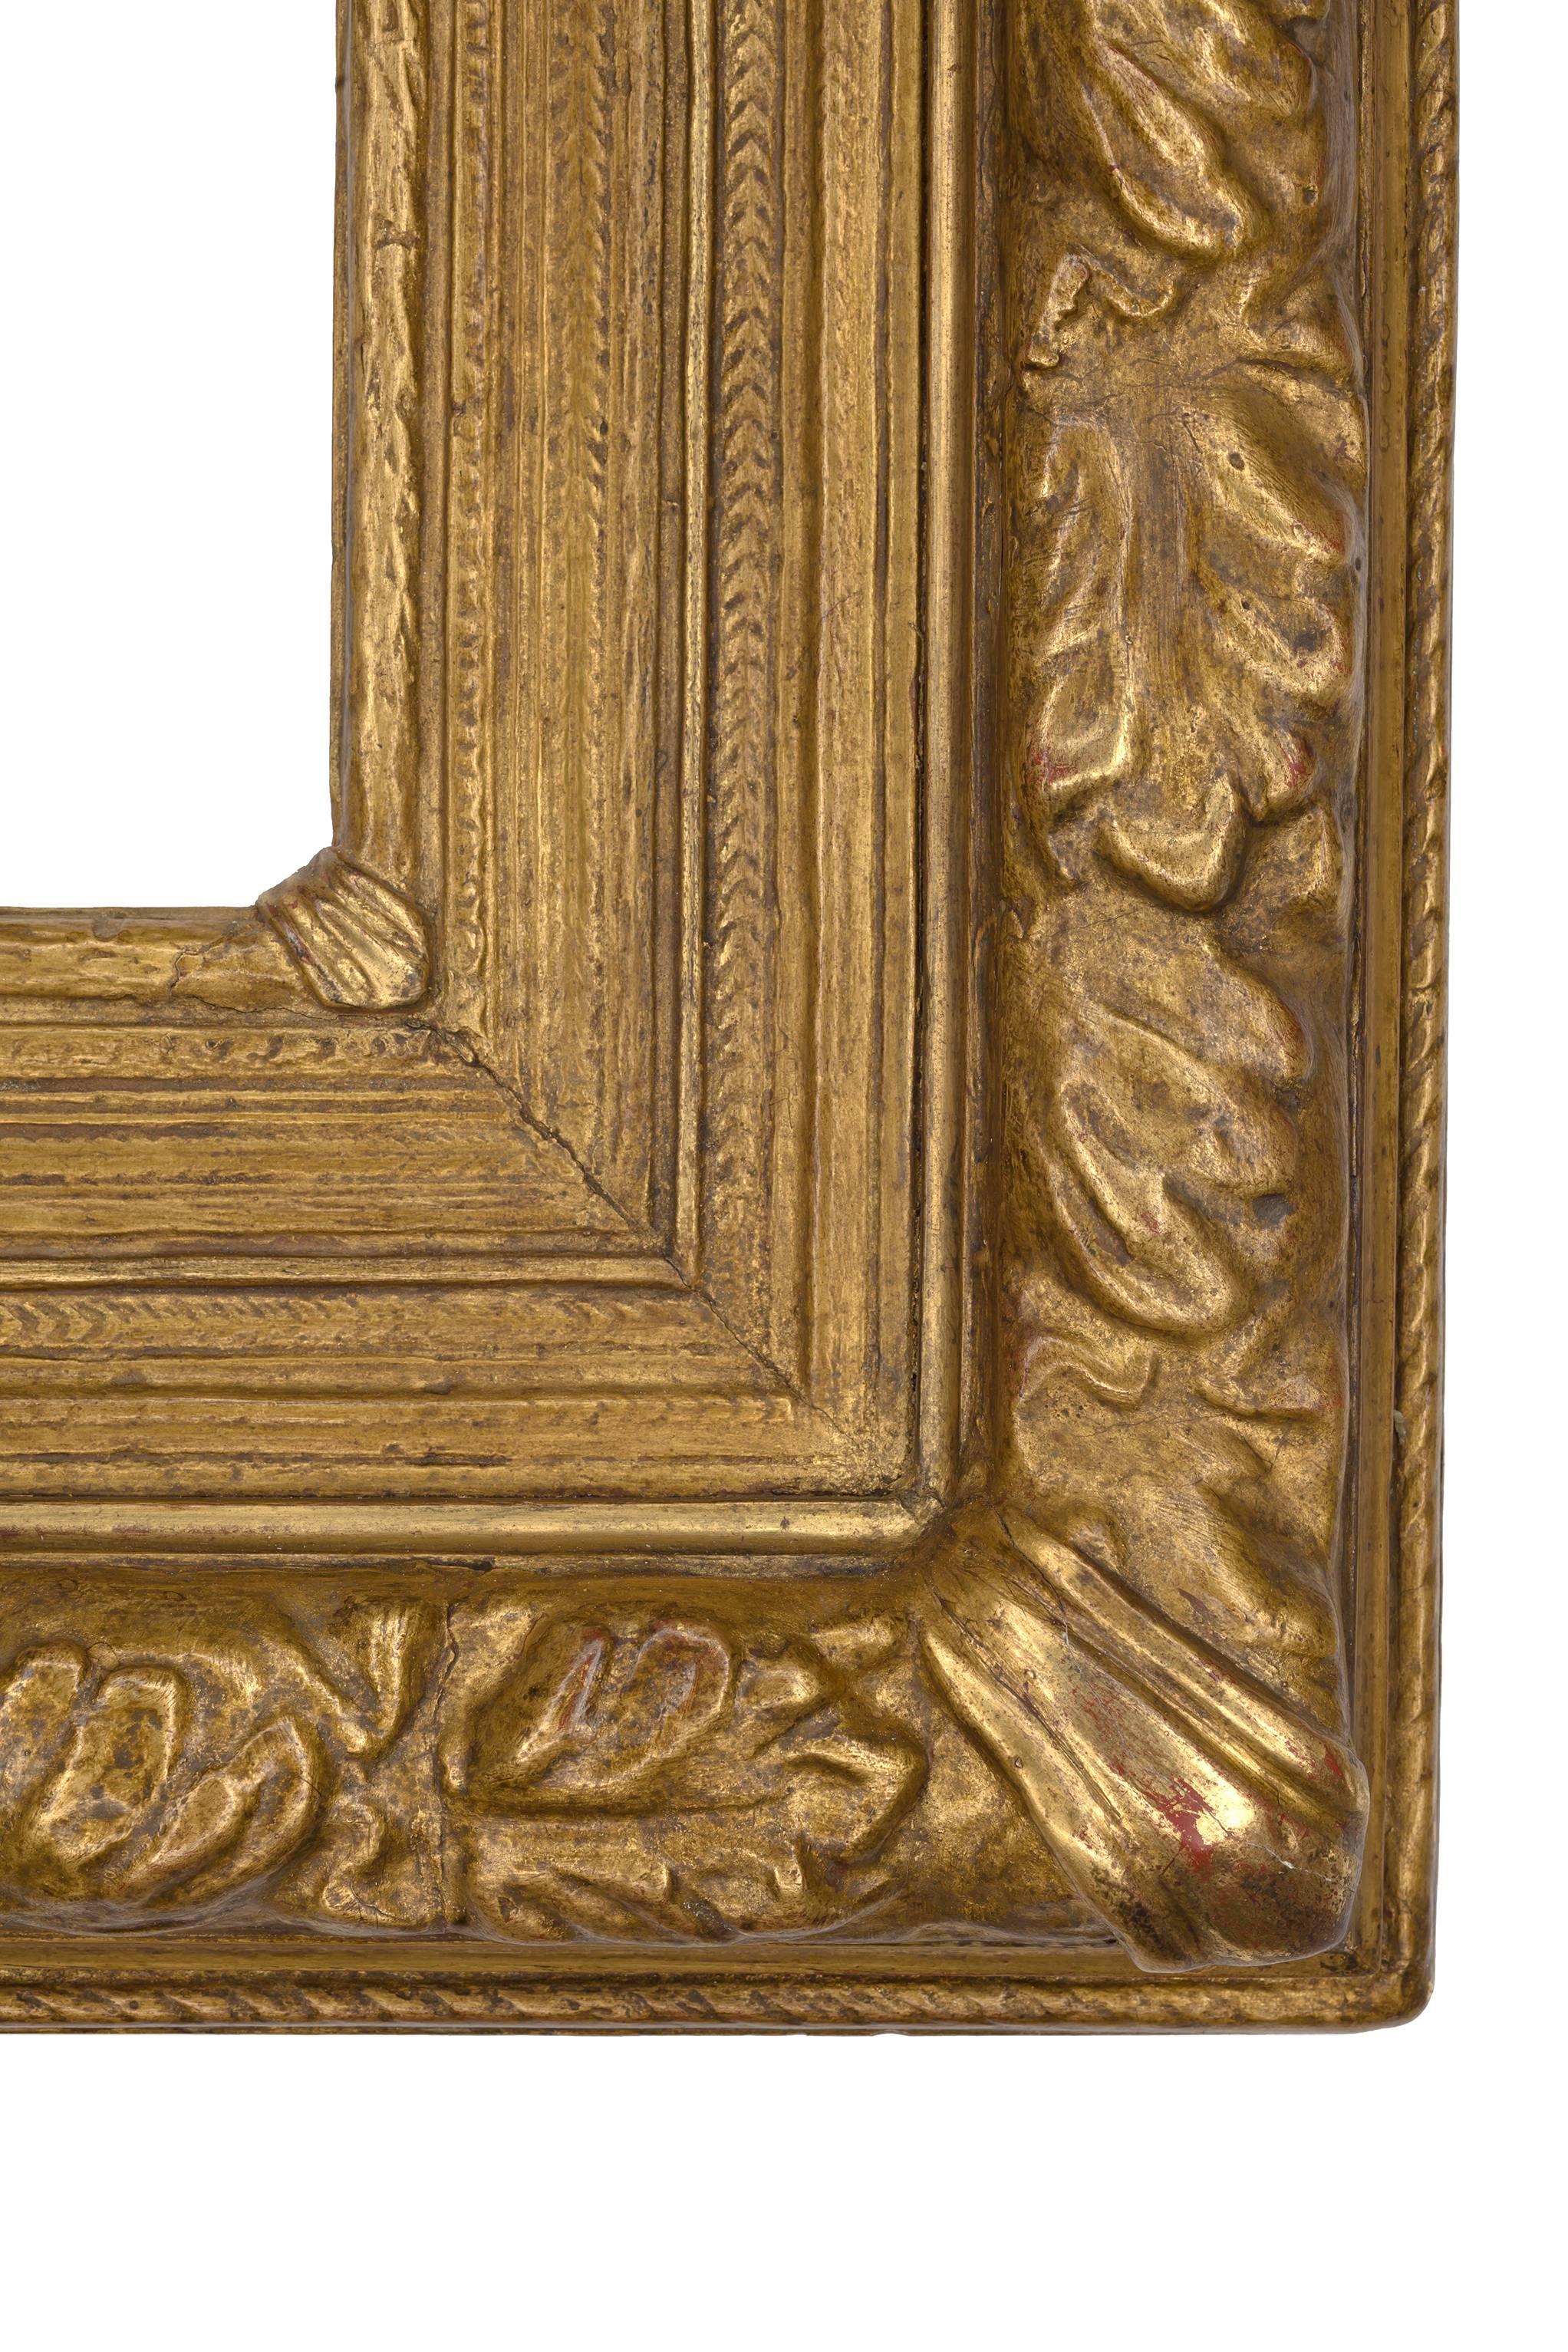 Rare design, early 20th century American frame designed by Stanford White, of McKimm Meade and White. This exceptional frame features a front portion in the classic 